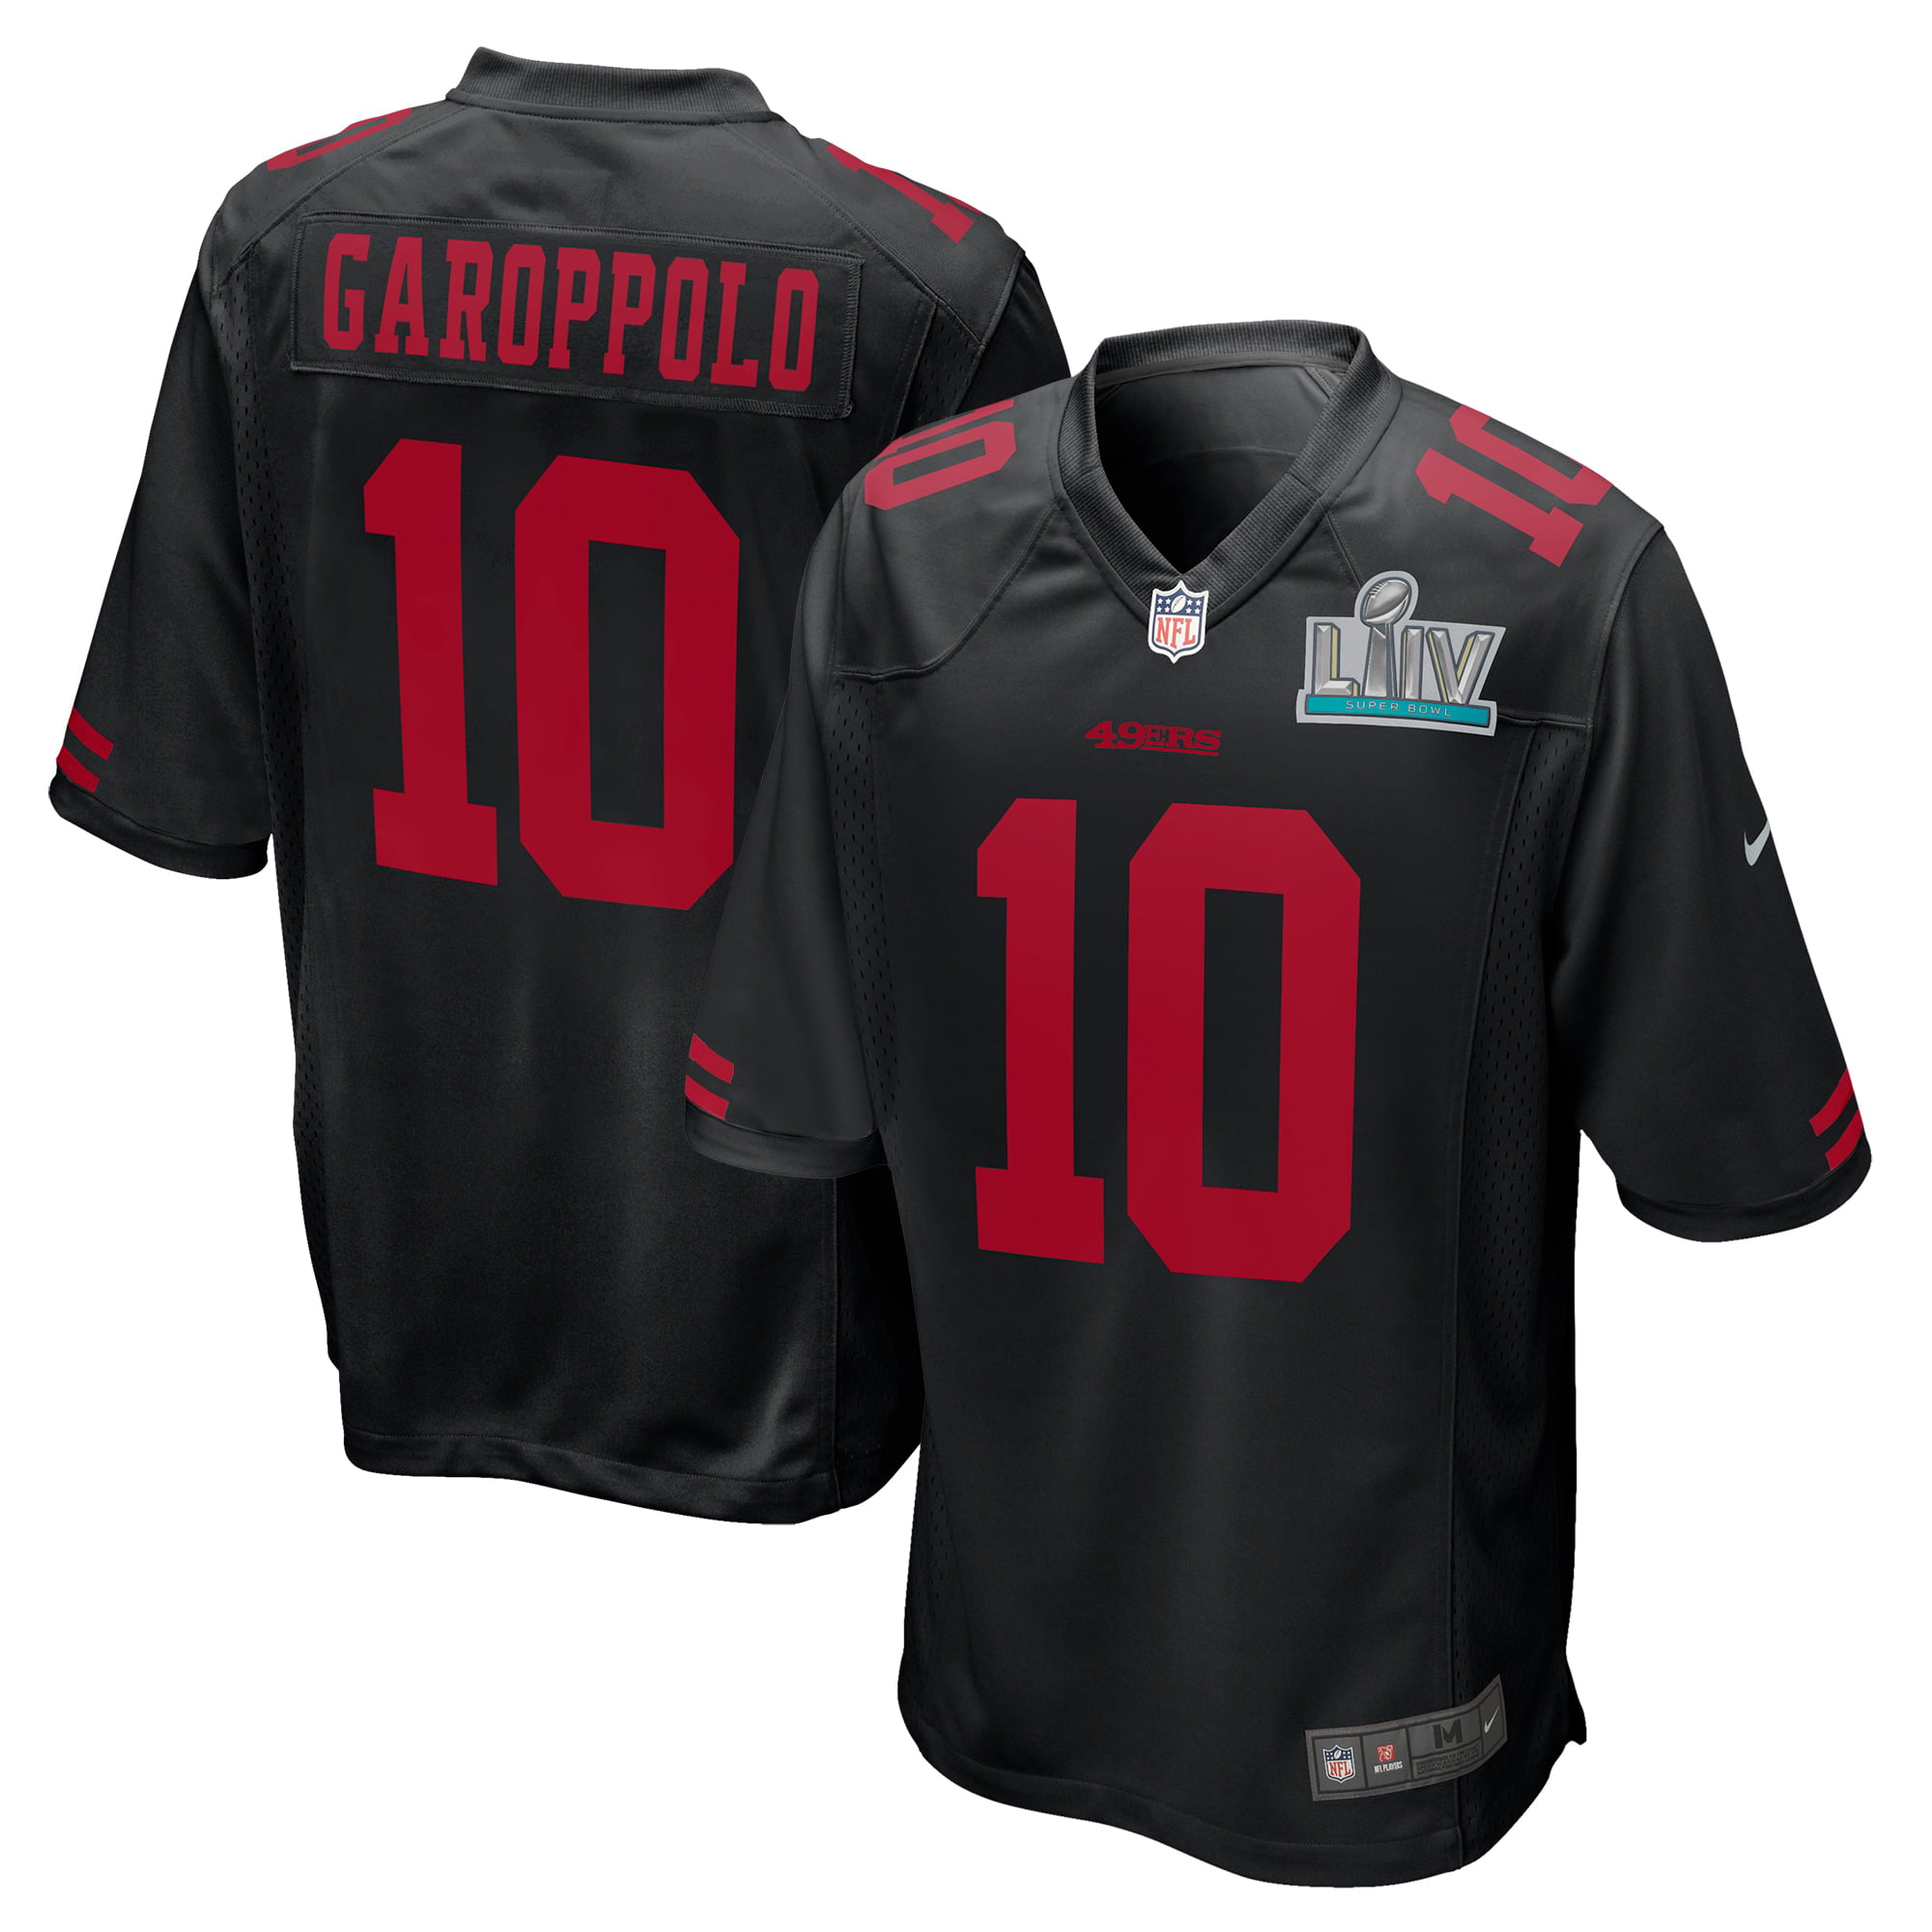 10 Garoppolo gave him a football gift American football jersey 49ers No women and children San Francisco Super Bowl supporter uniform suitable for men